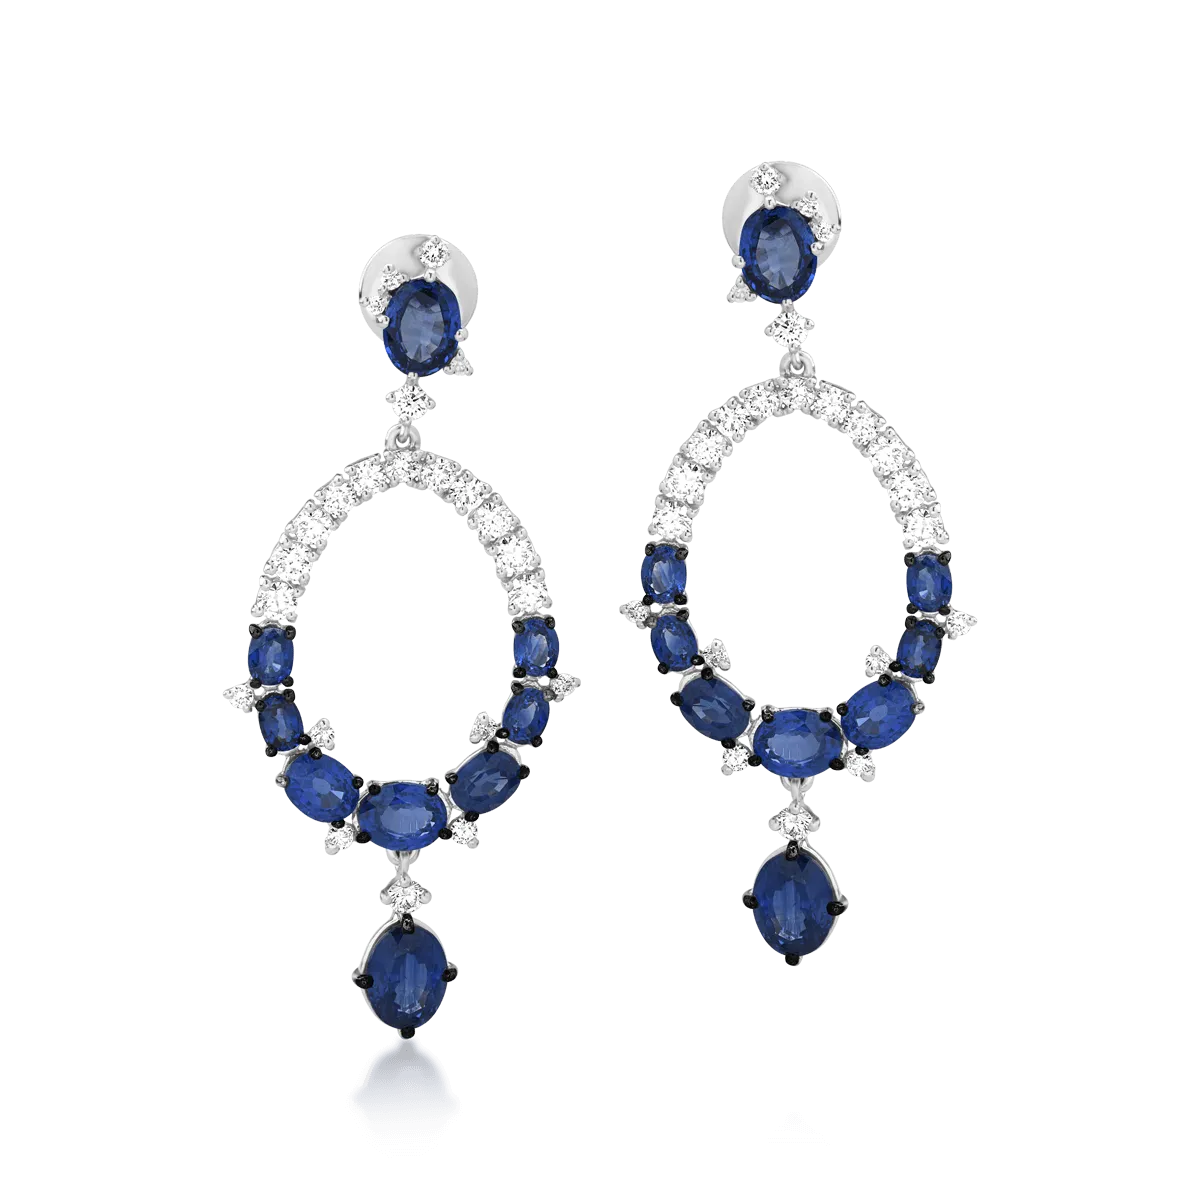 18K white gold earrings with 10.47ct sapphires and 1.96ct diamonds